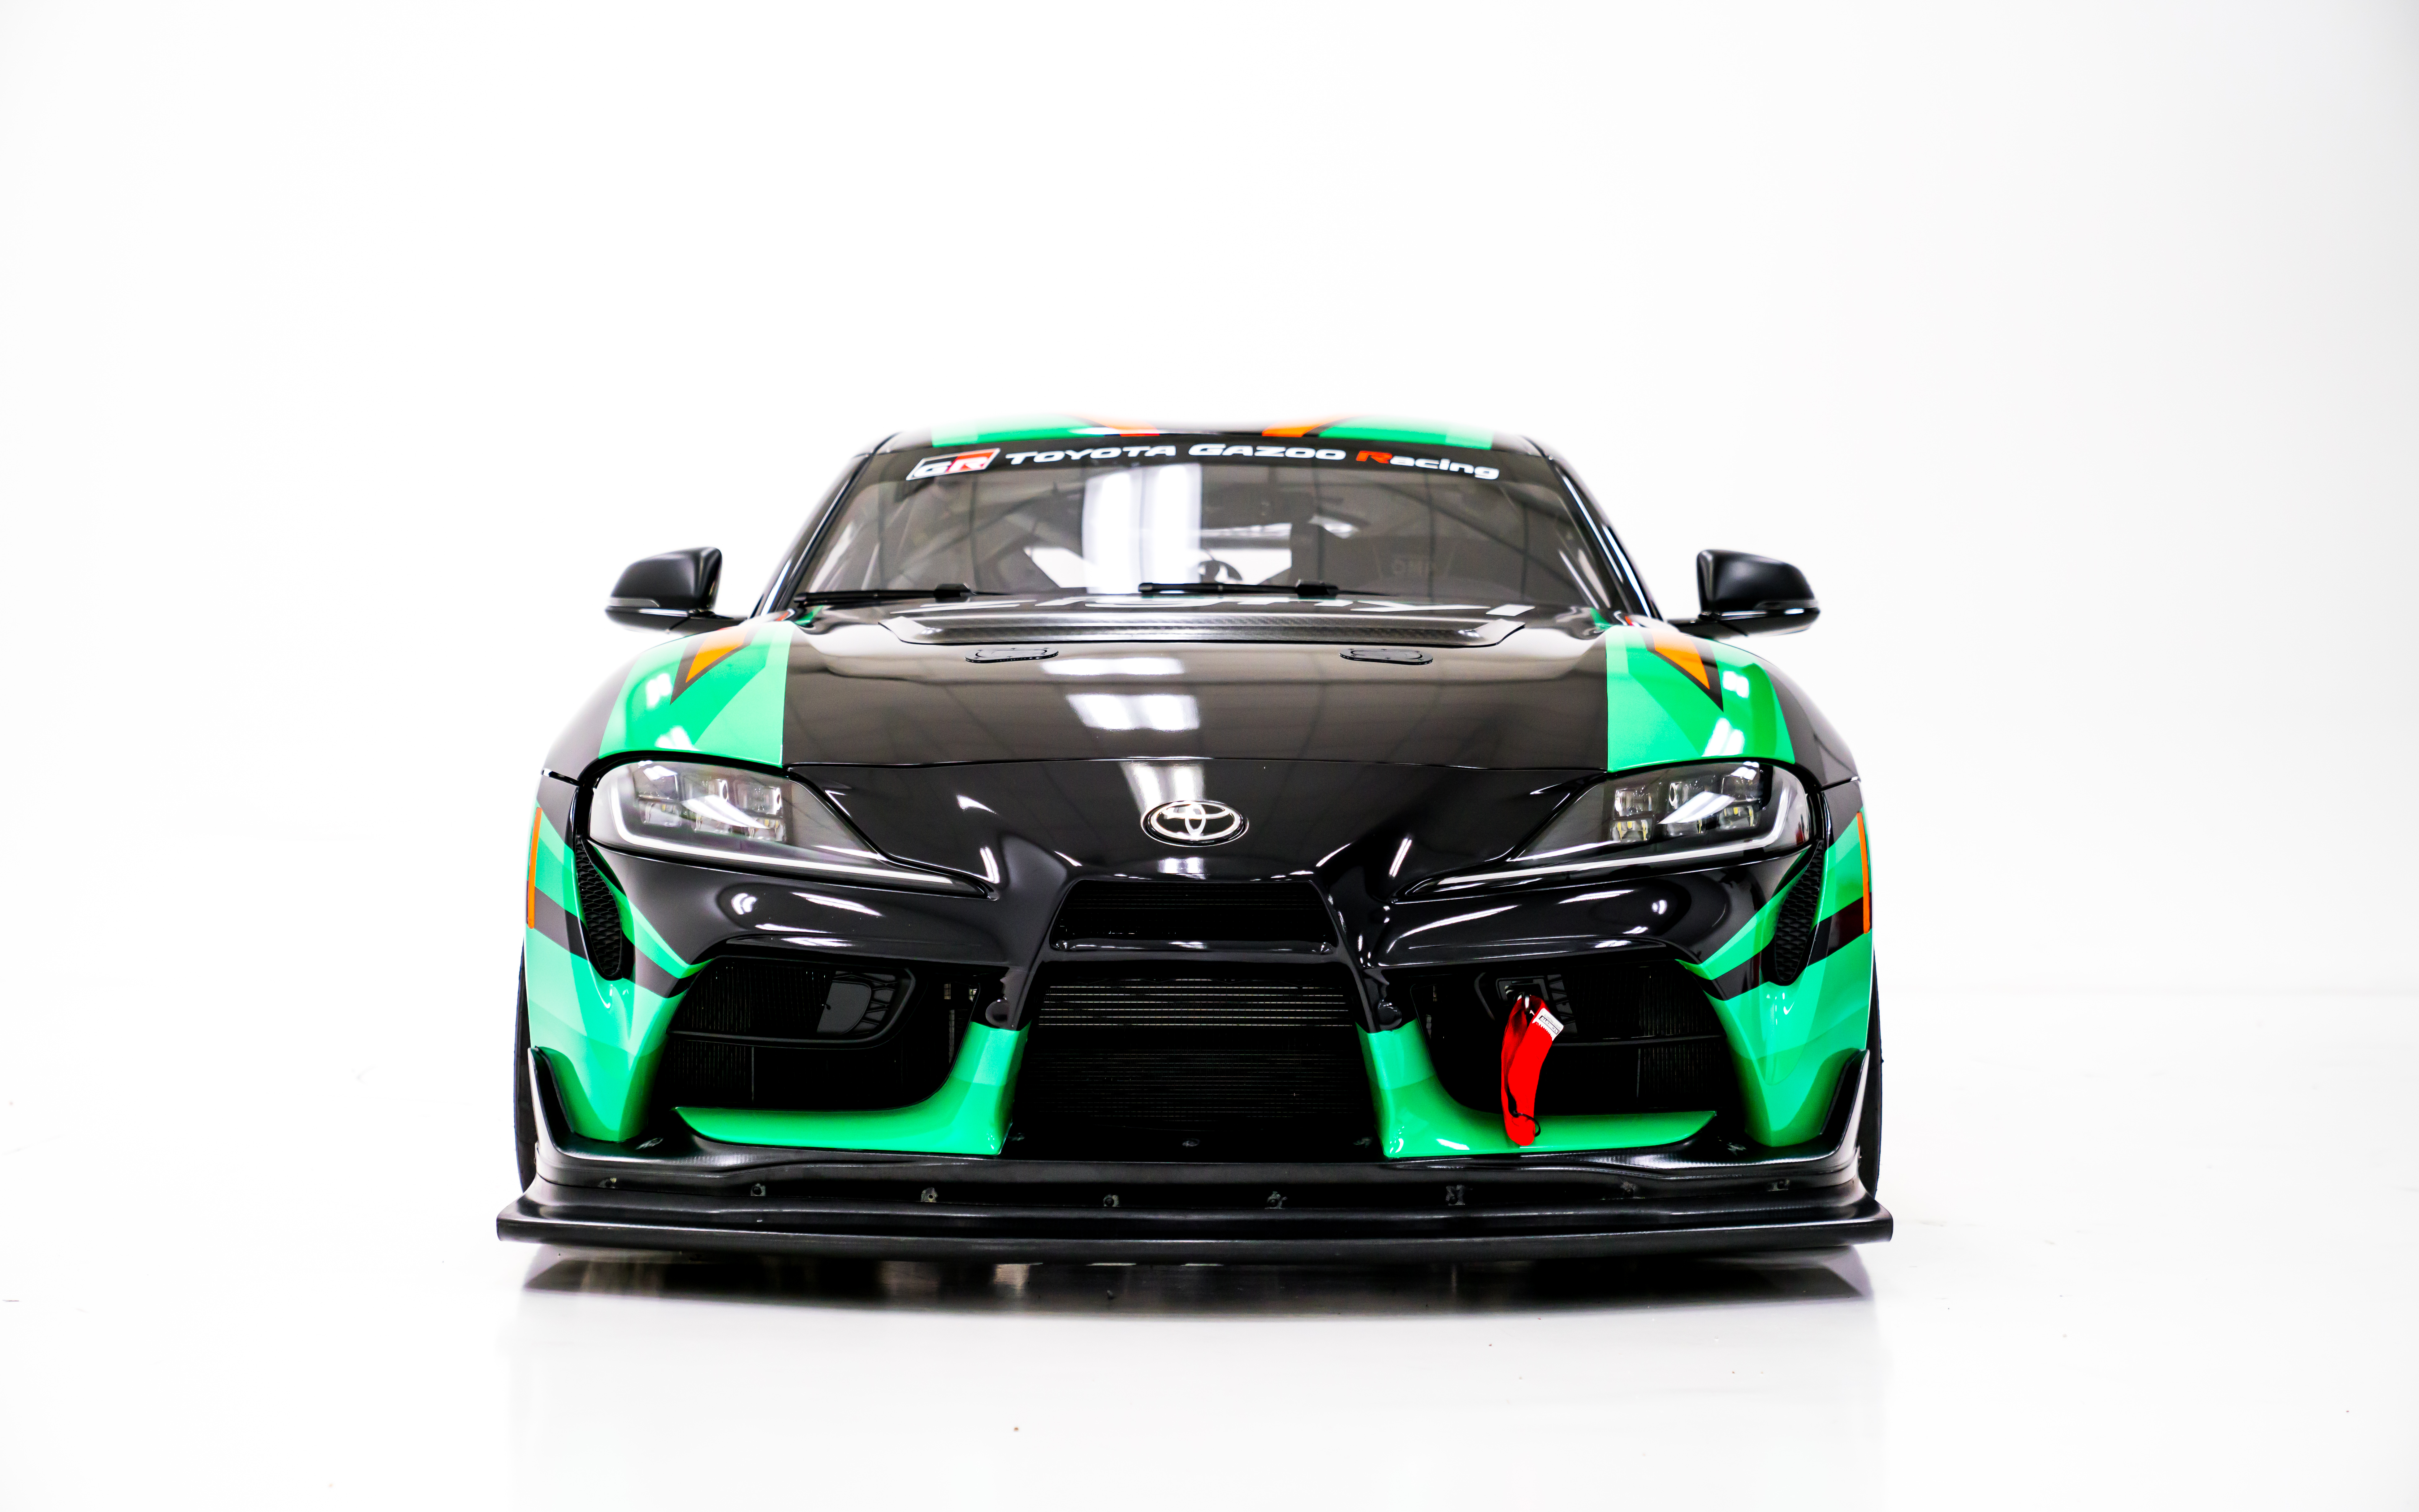 Forbush Performance Launches with the First Toyota GR Supra GT4 in SRO GT4 America